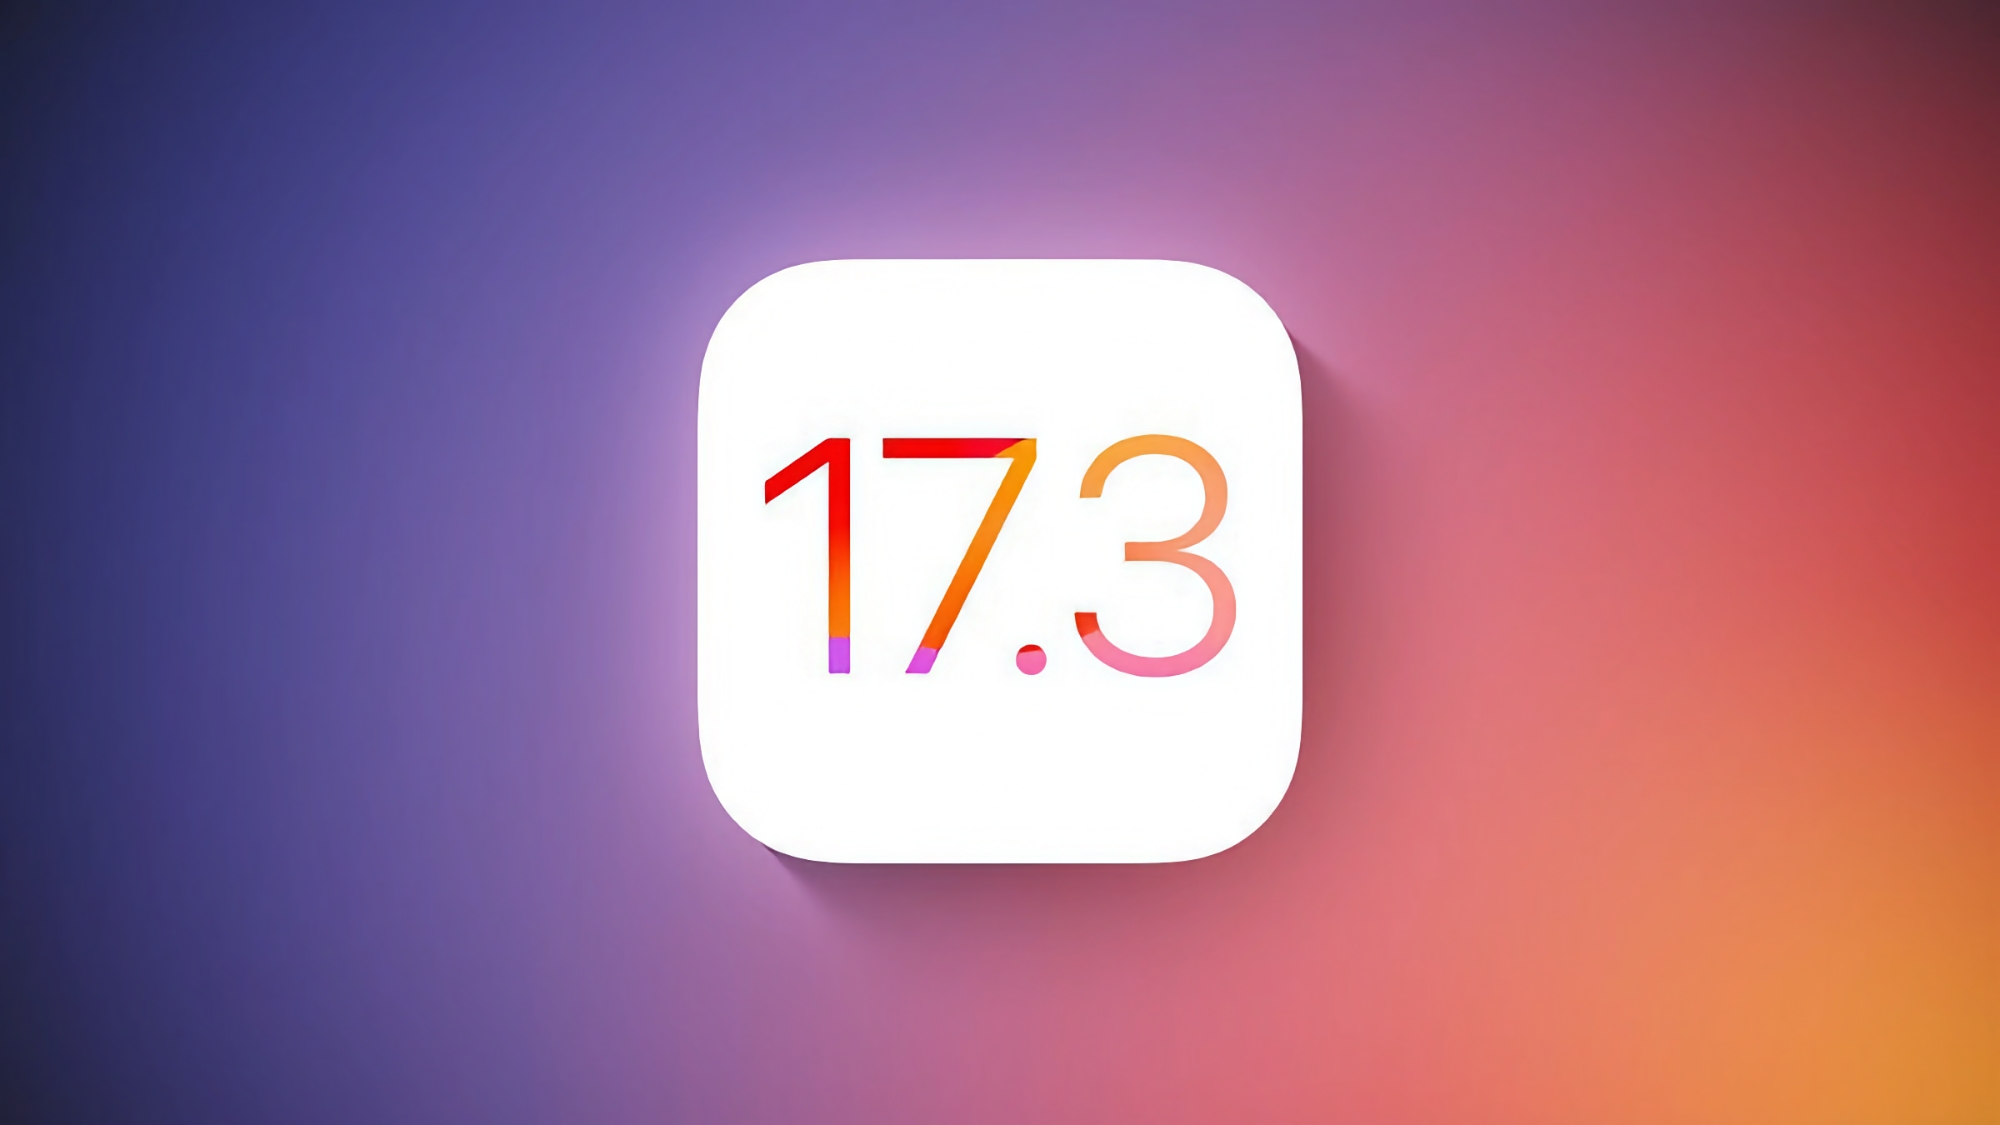 Apple has started testing iOS 17.3